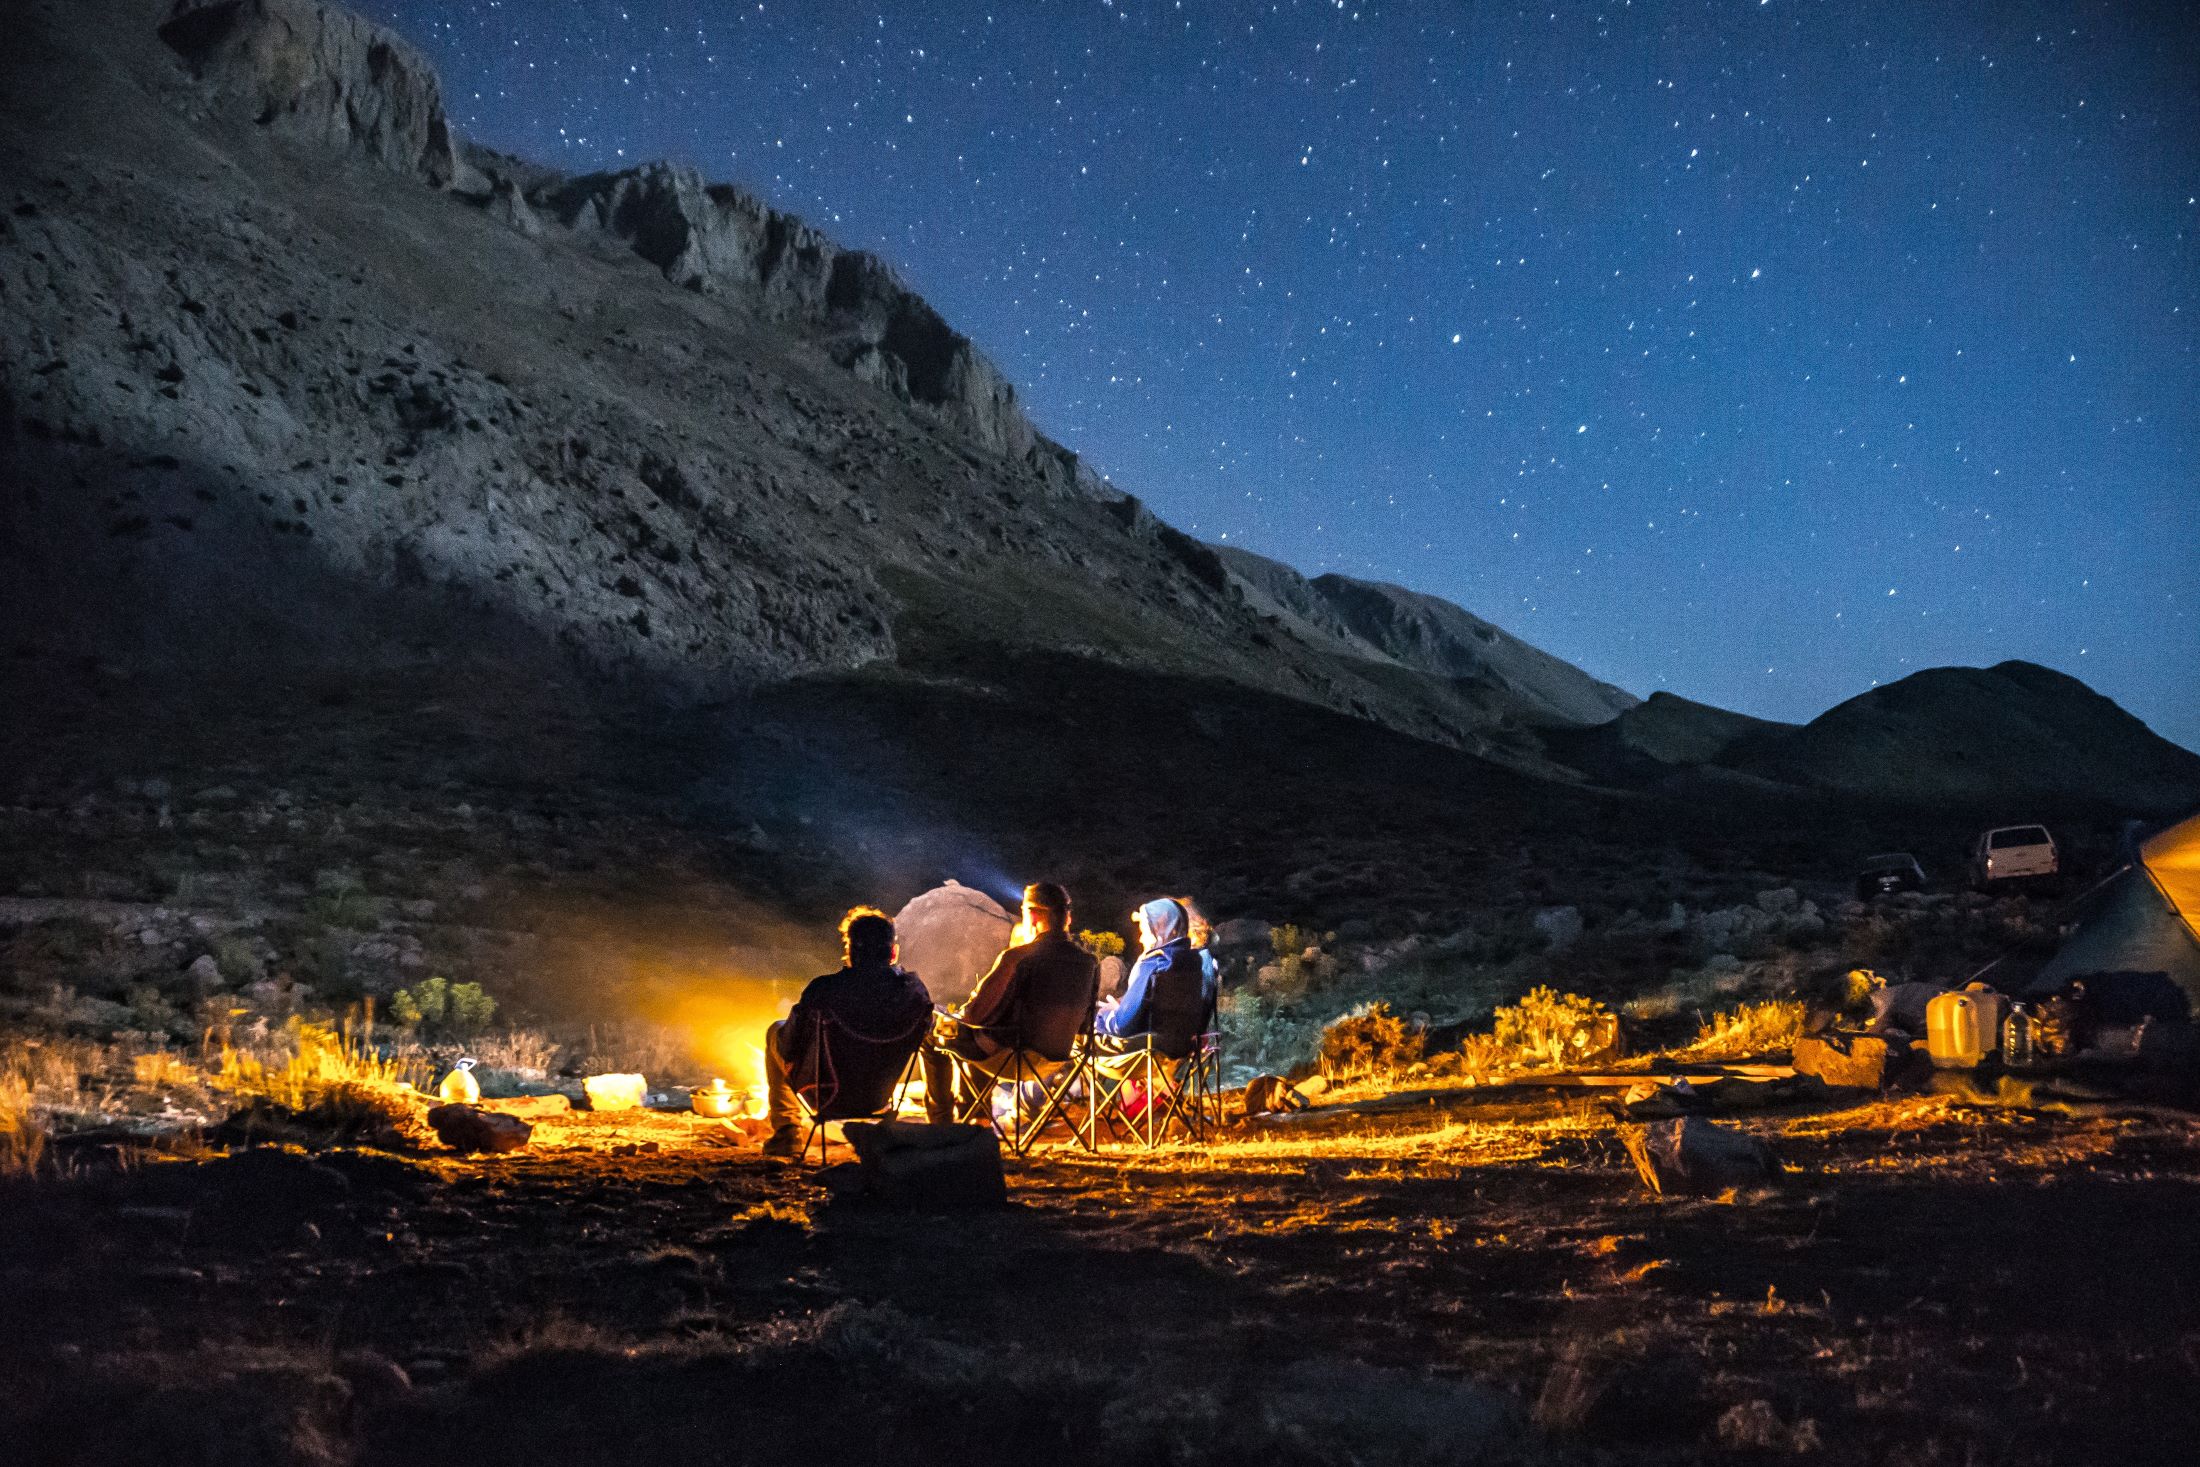 A group of campers at night sitting around a fire at the base of a mountain in the desert. 